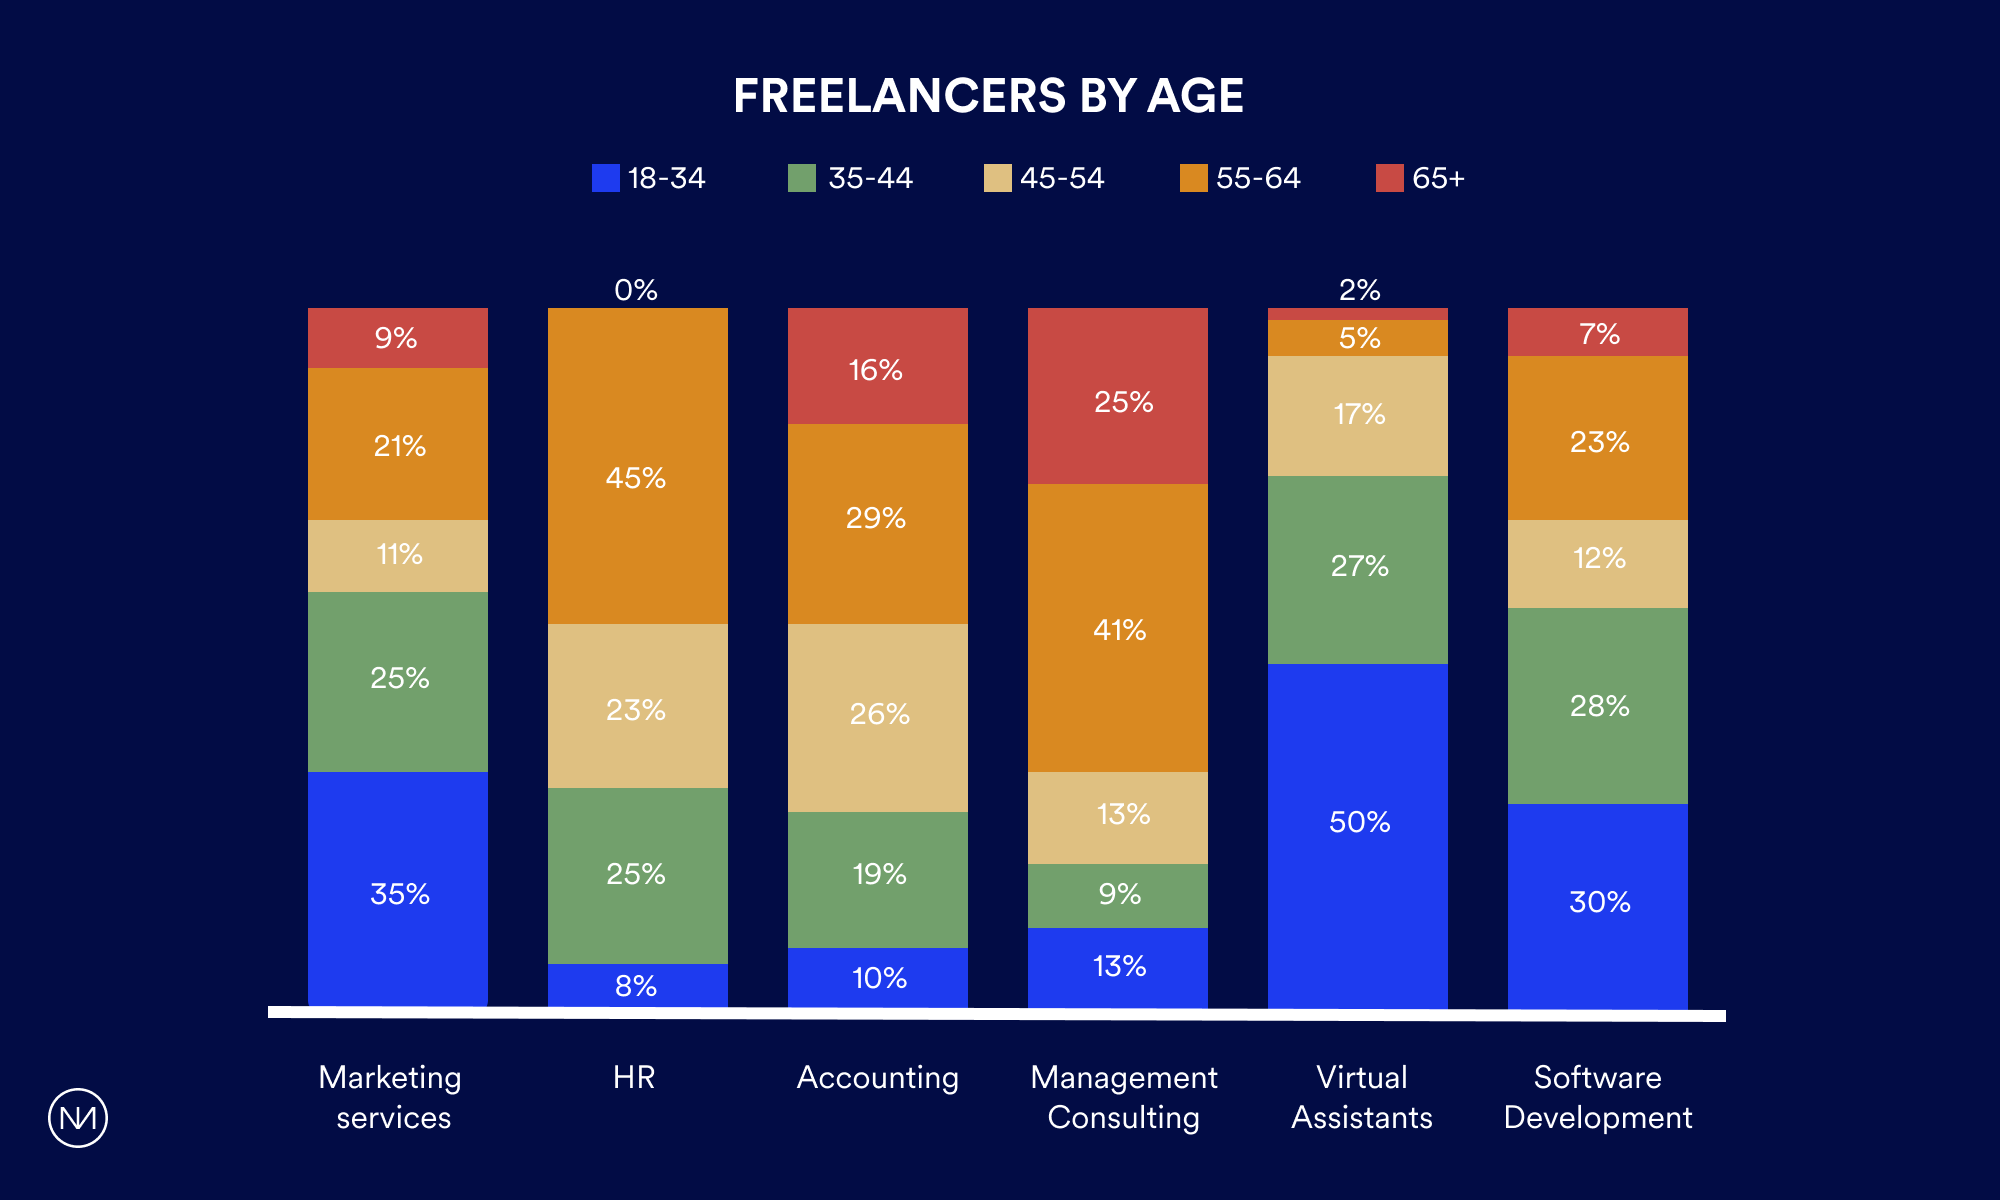 U.S. freelancer - type of work by age